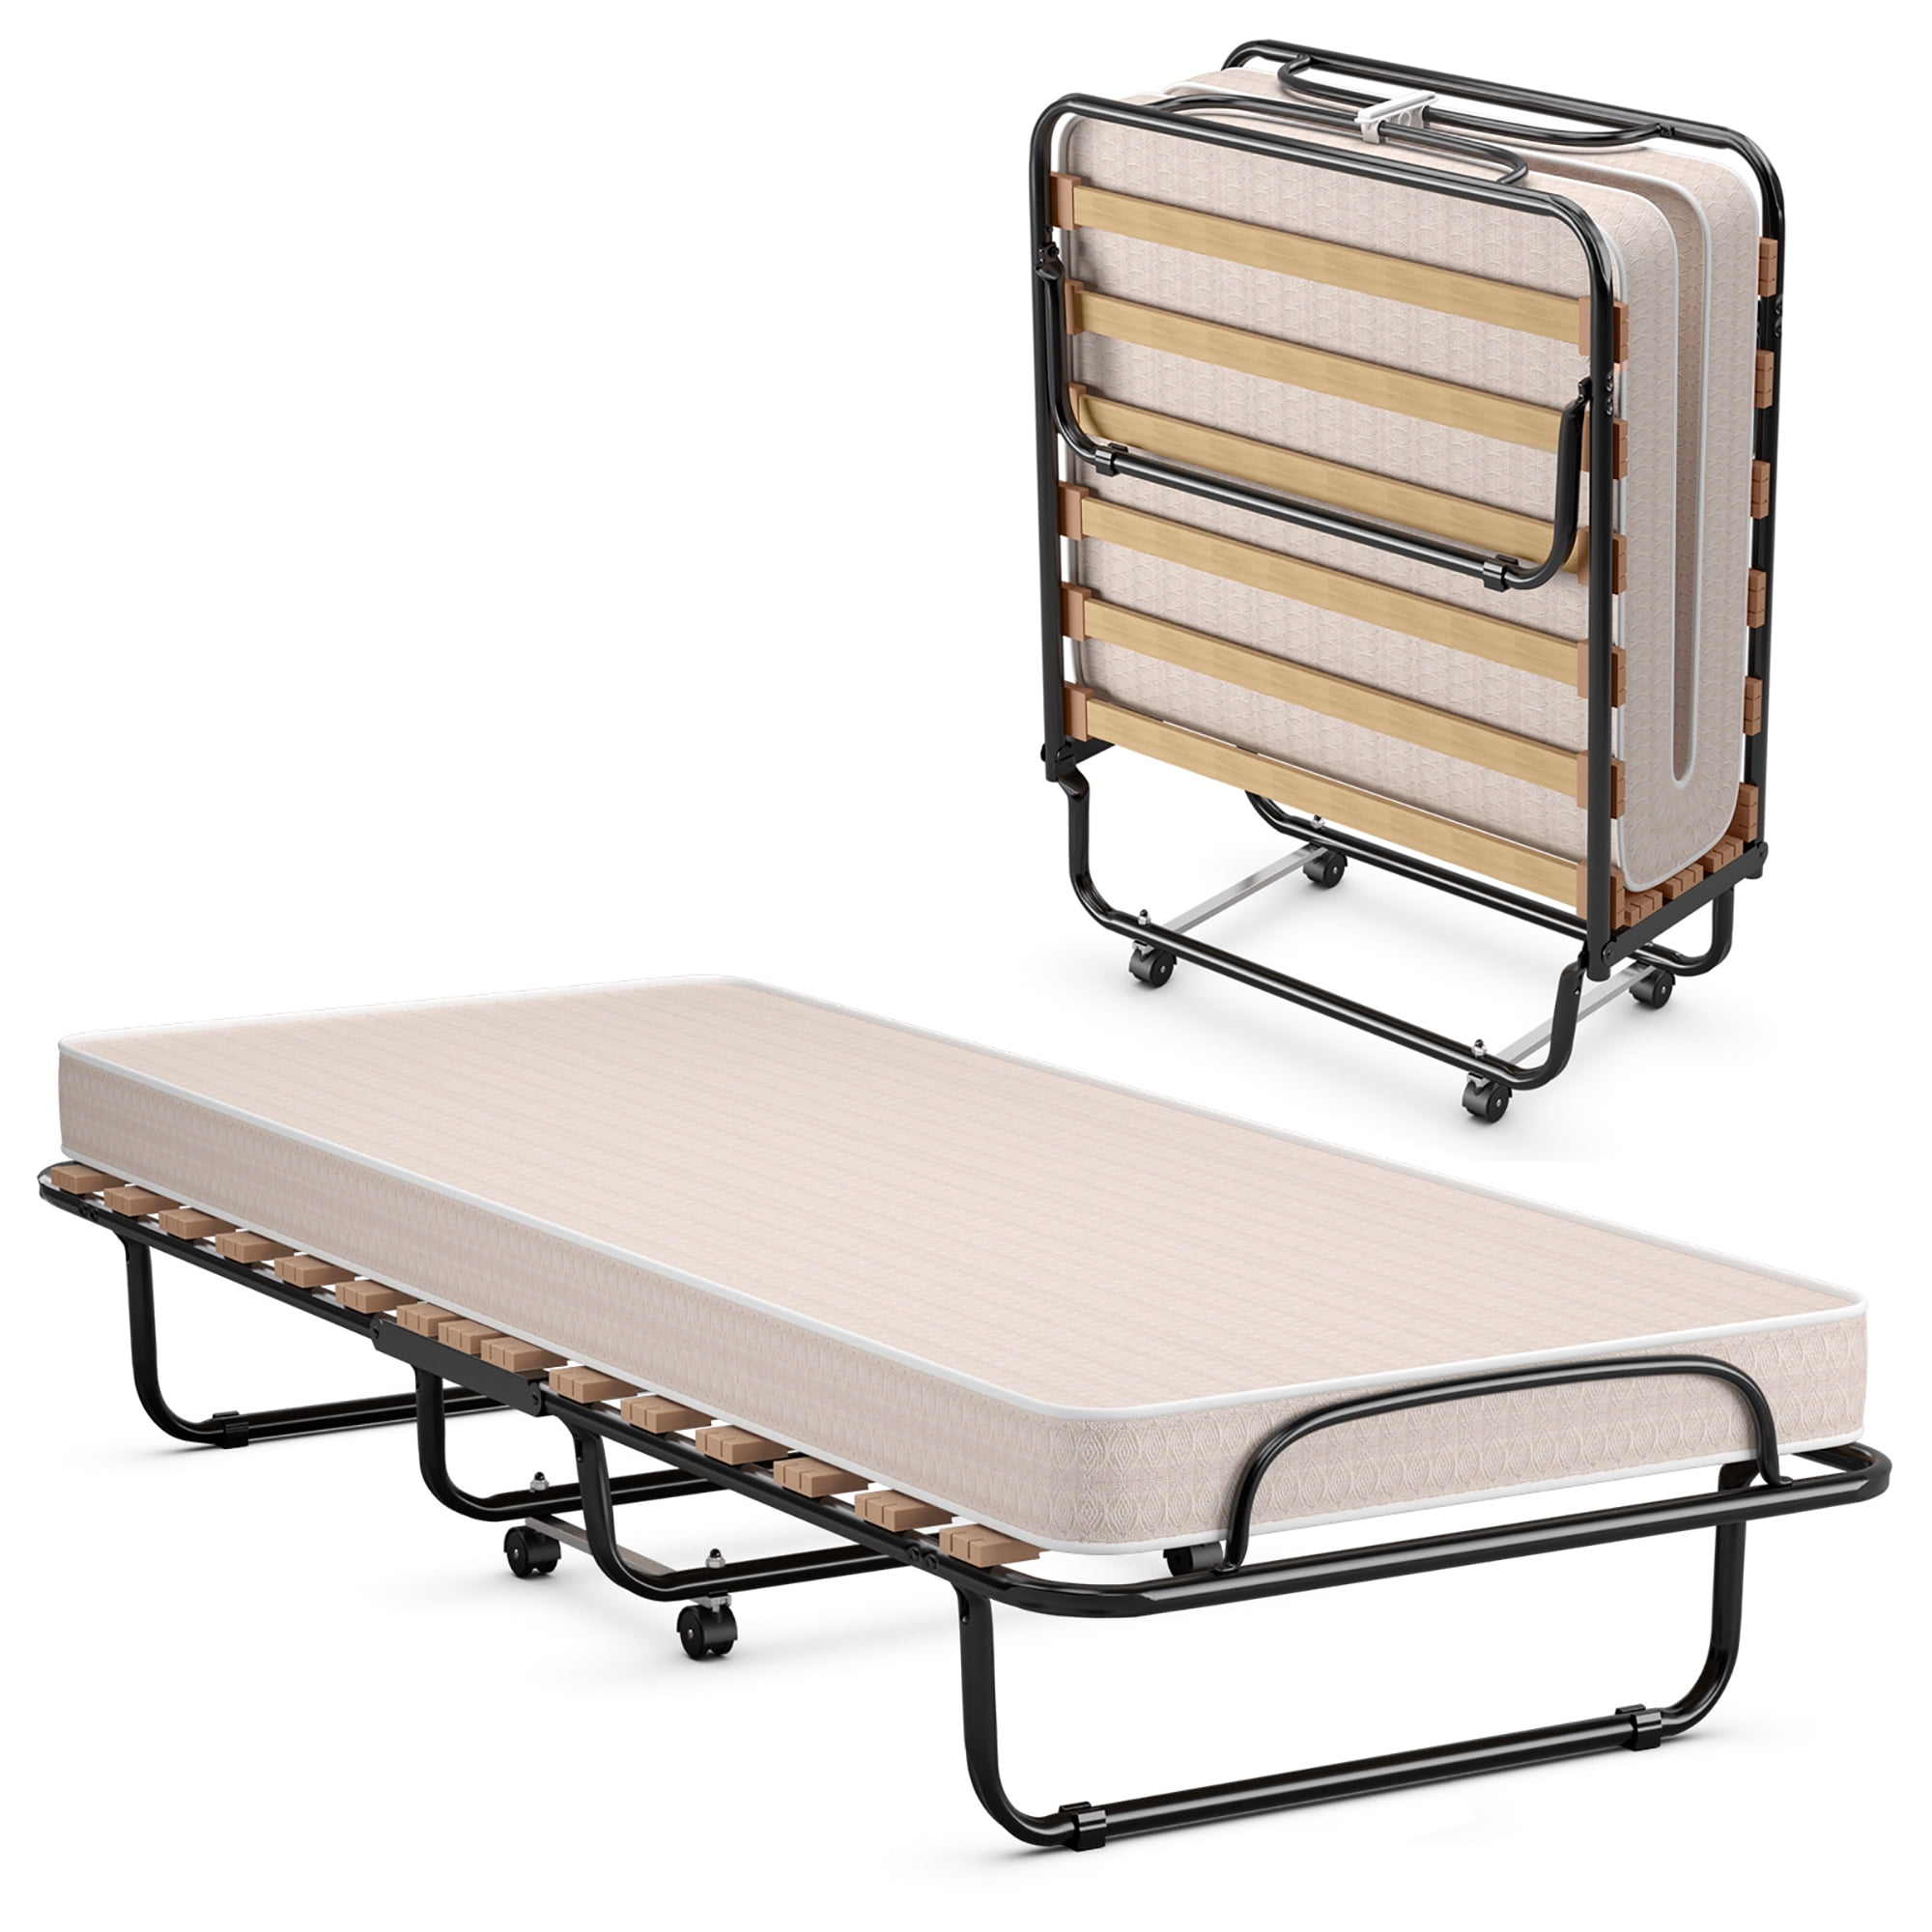 Camping Cot Folding Bed Sleeper Portable Durable Steel Frame Thick Foam Mattress 